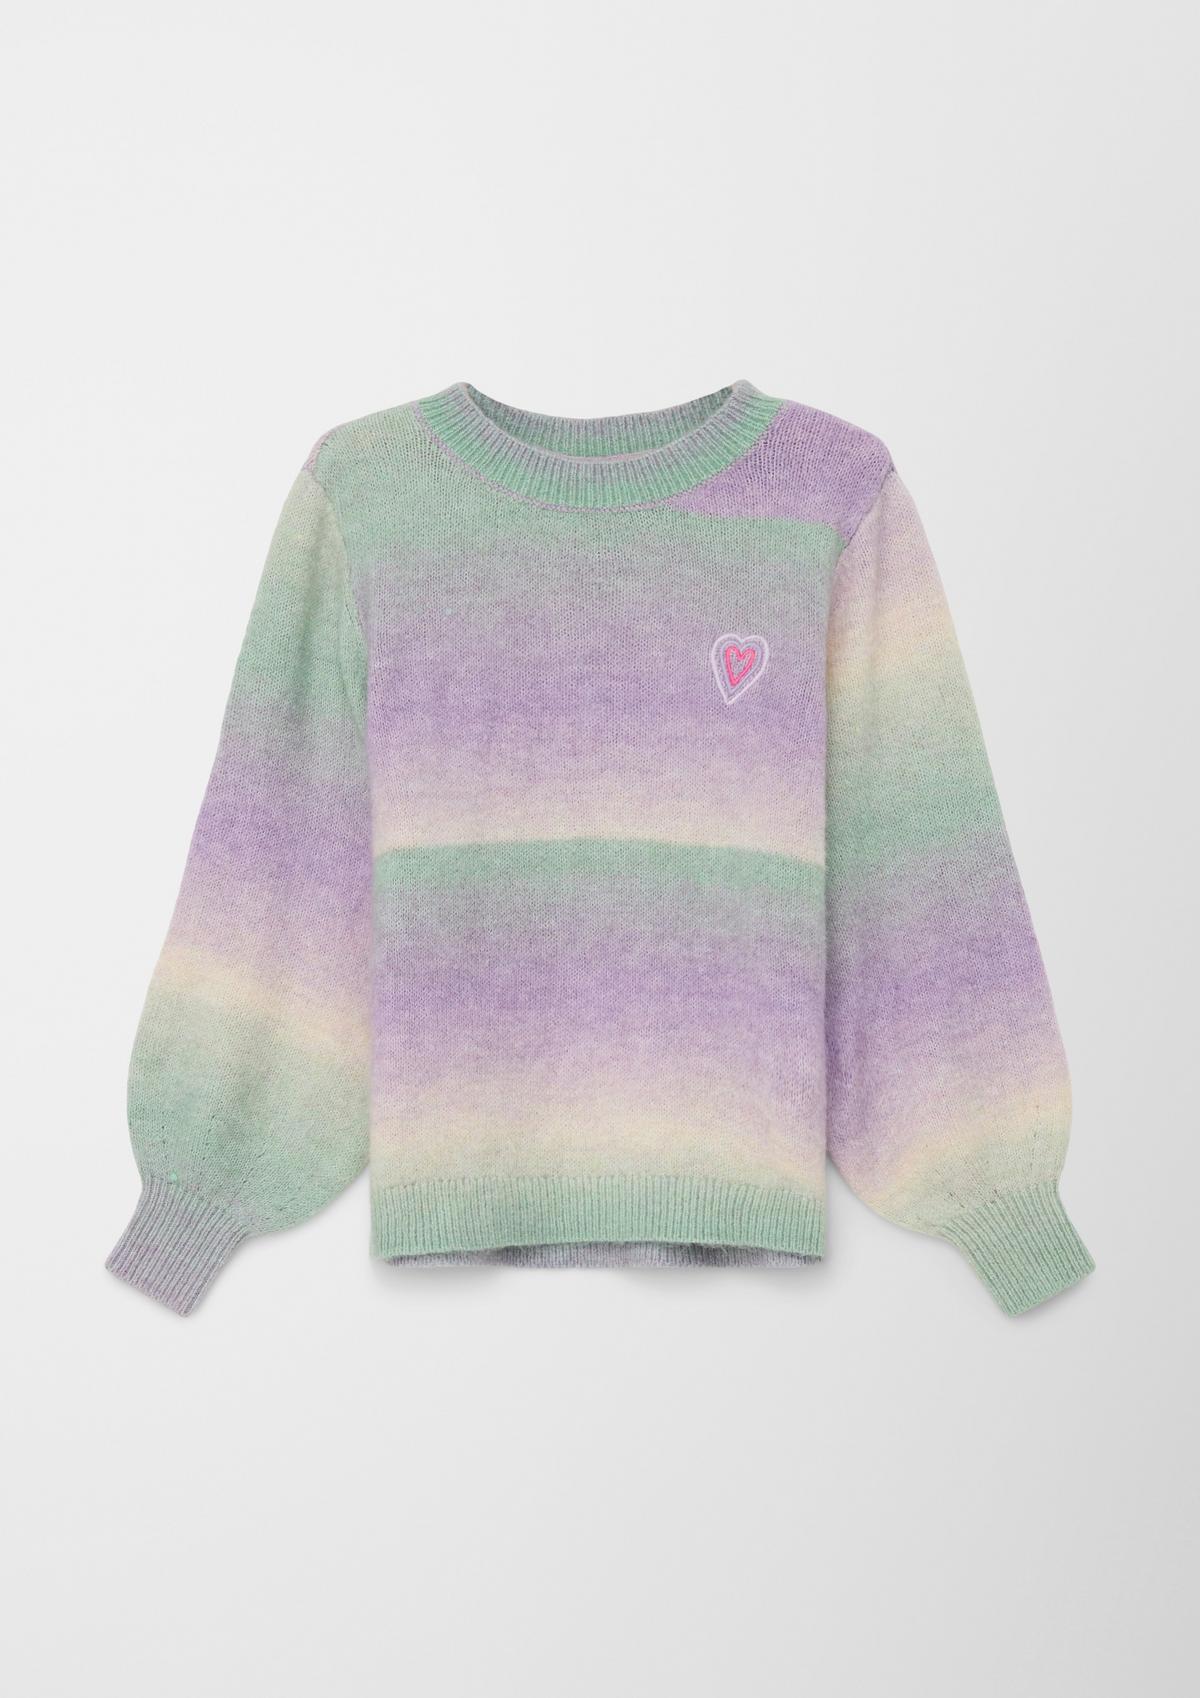 s.Oliver Knitted jumper with a heart appliqué